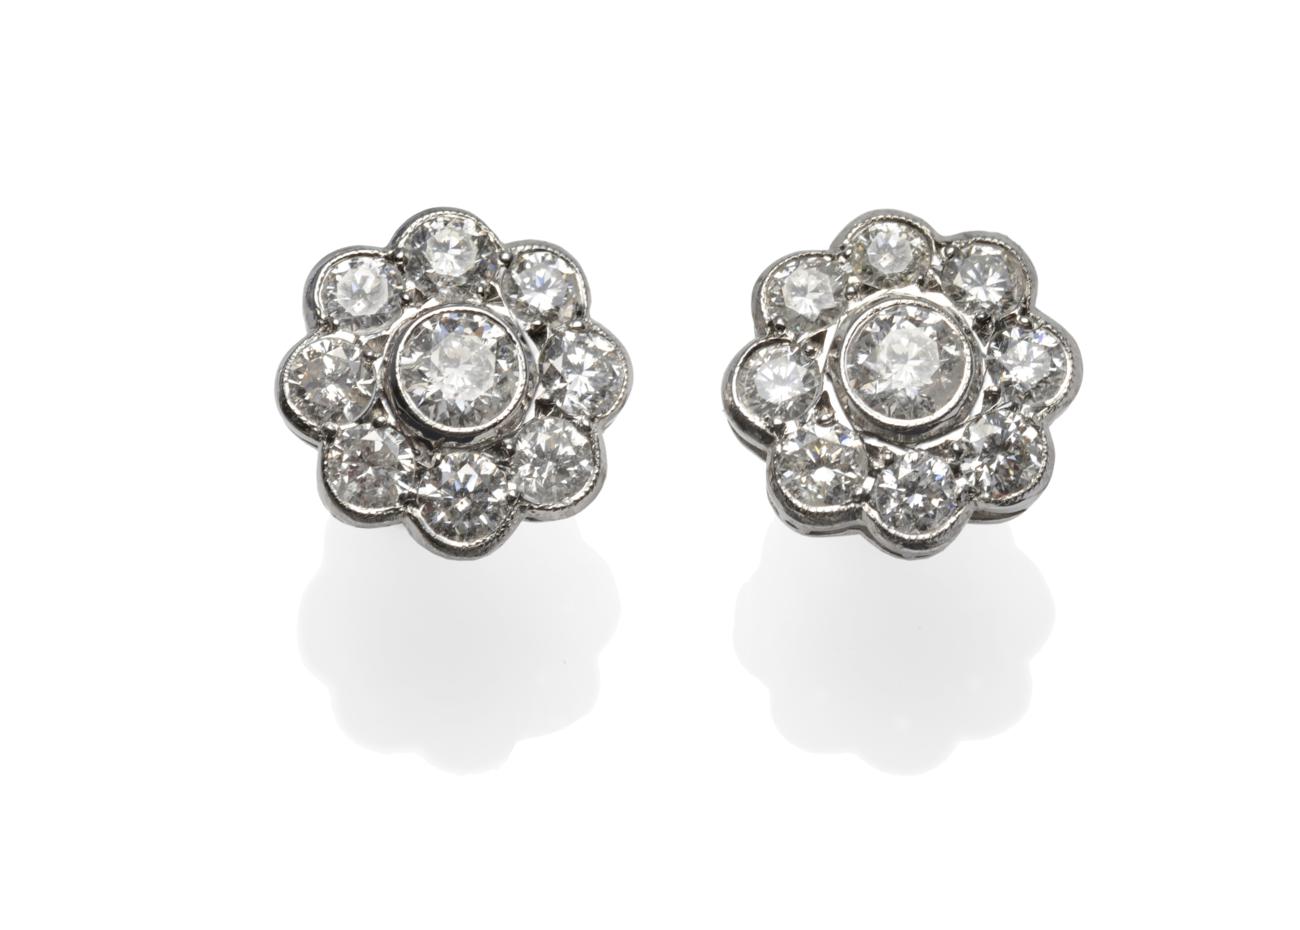 A Pair of Diamond Cluster Earrings, each comprising nine round brilliant cut diamonds in a circular